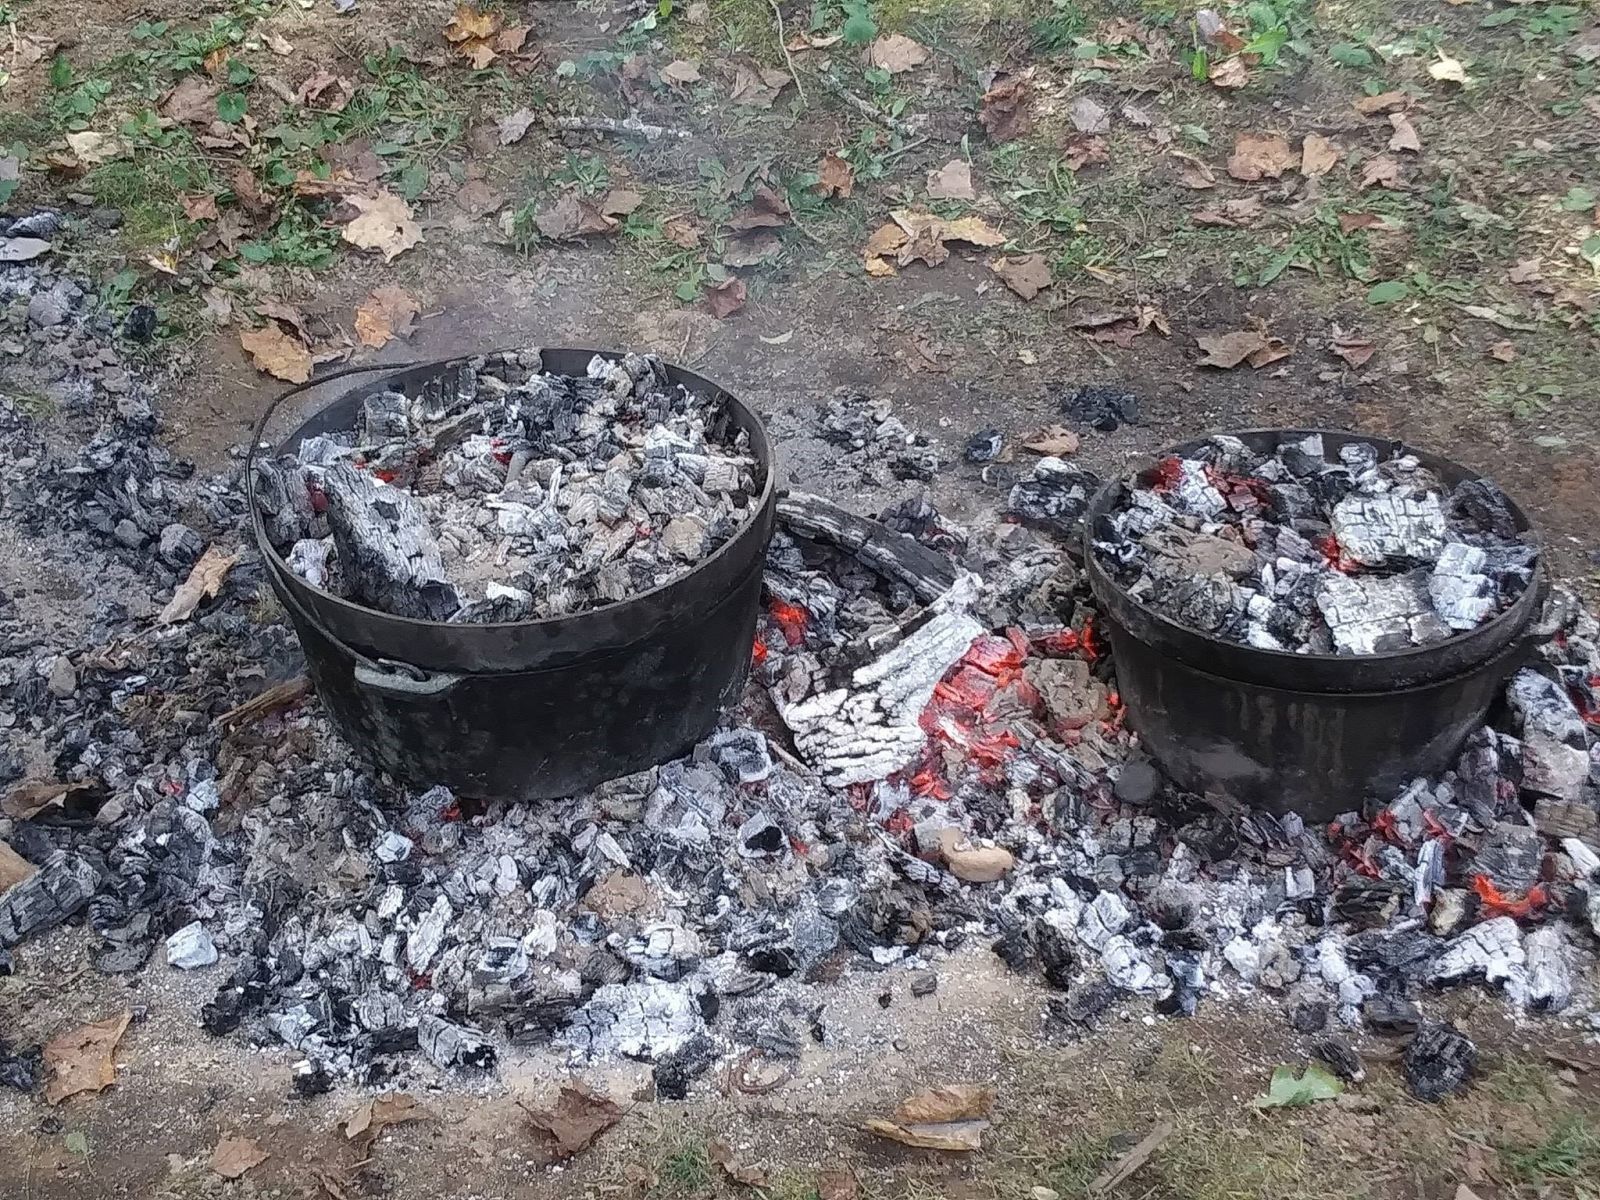 This image shows two different size cast iron dutch ovens being used while out camping above some hot coals